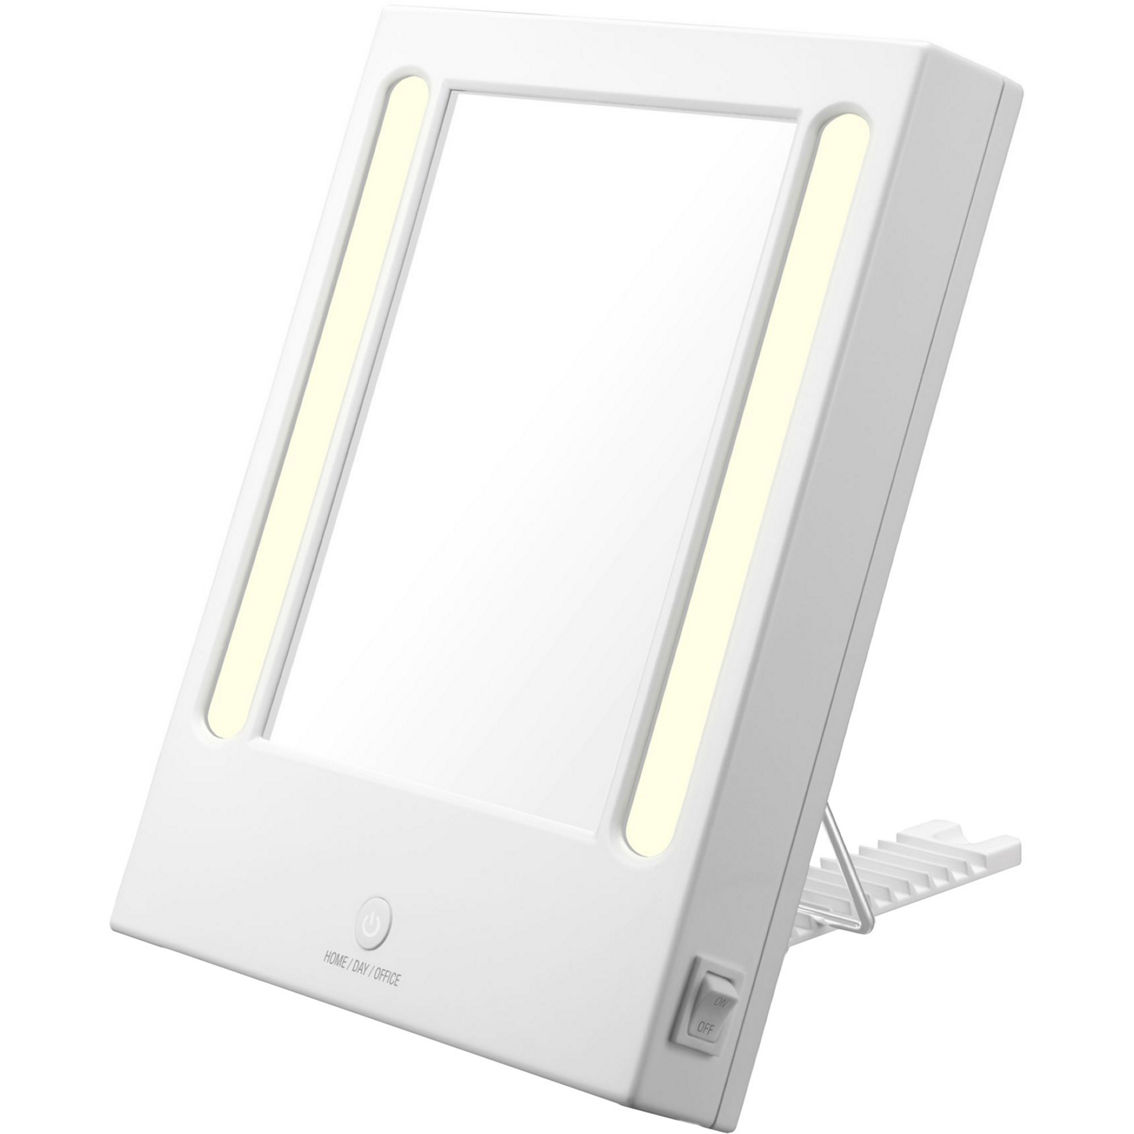 Conair LED Lighted Mirror - Image 5 of 6